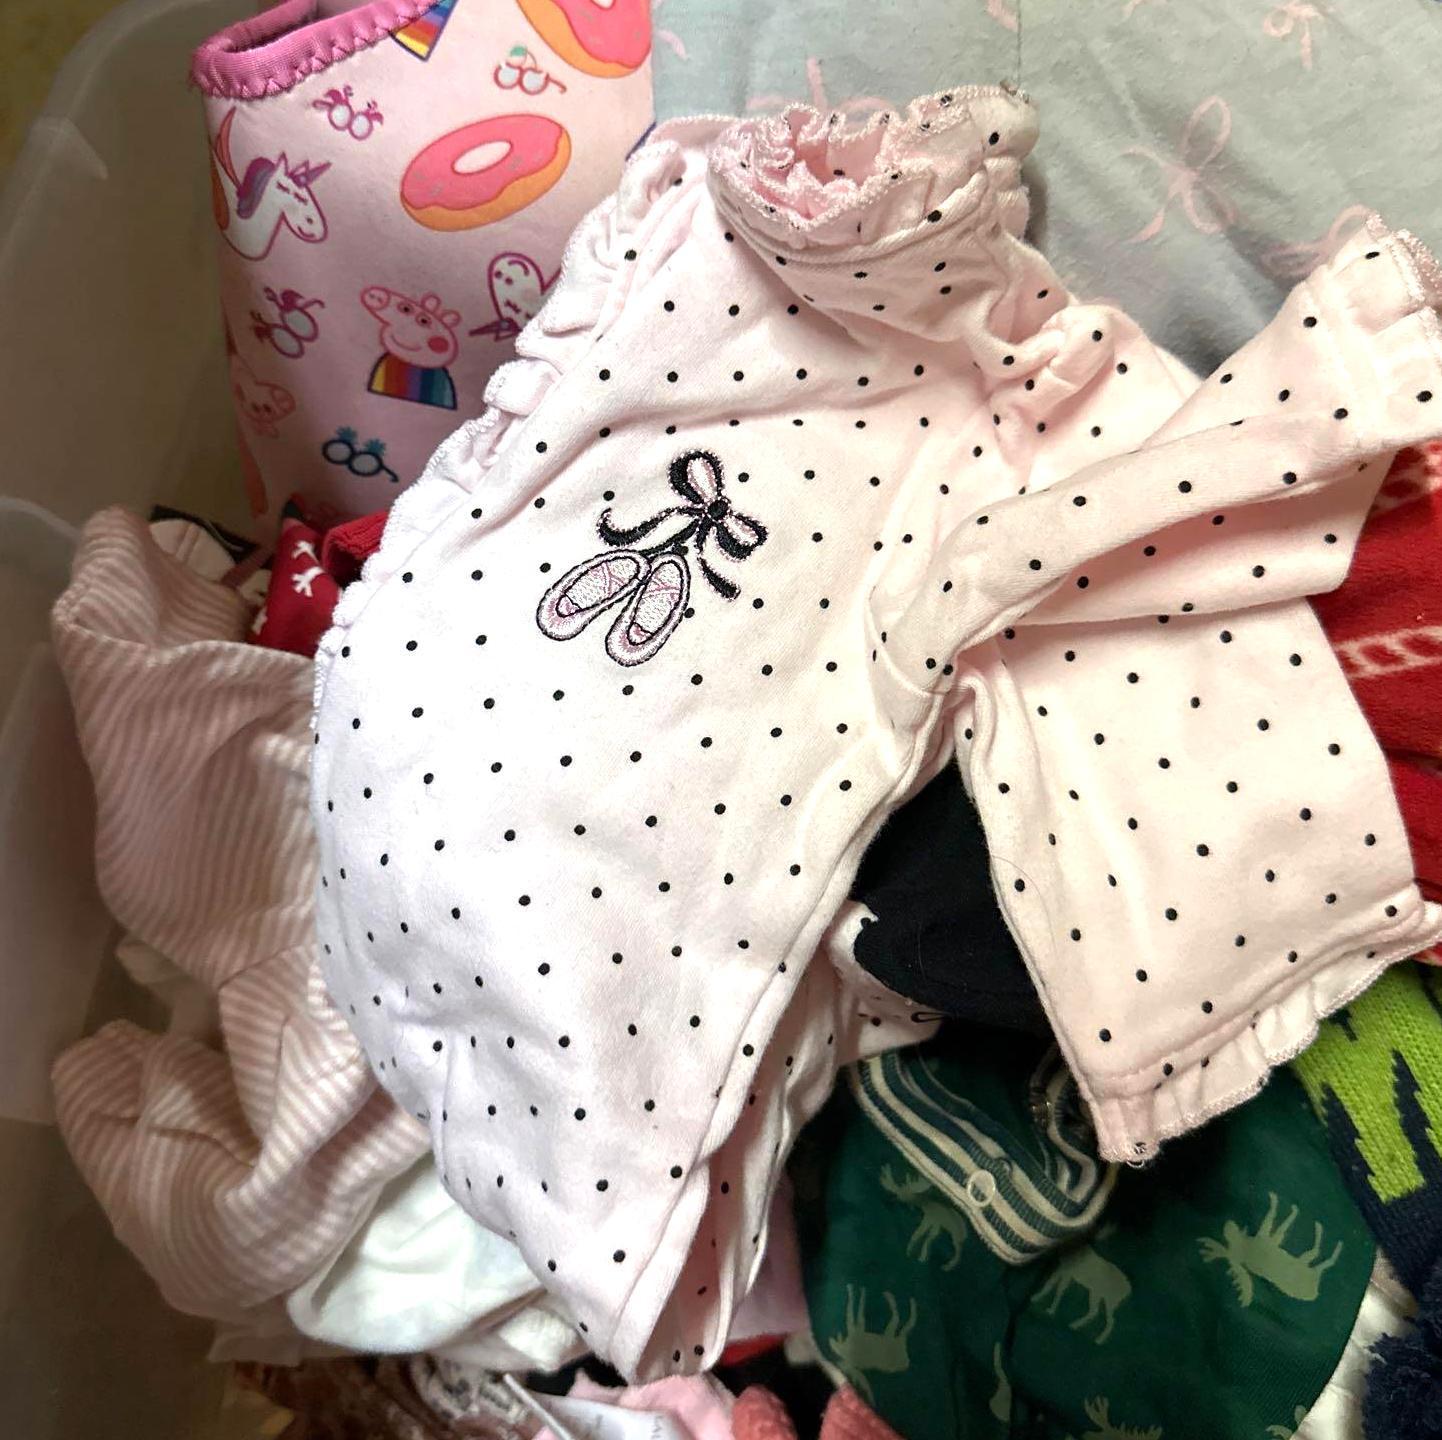 Tote Full of Baby Girl Clothes & 2 Life jackets size Newborn to 6months- in good condition